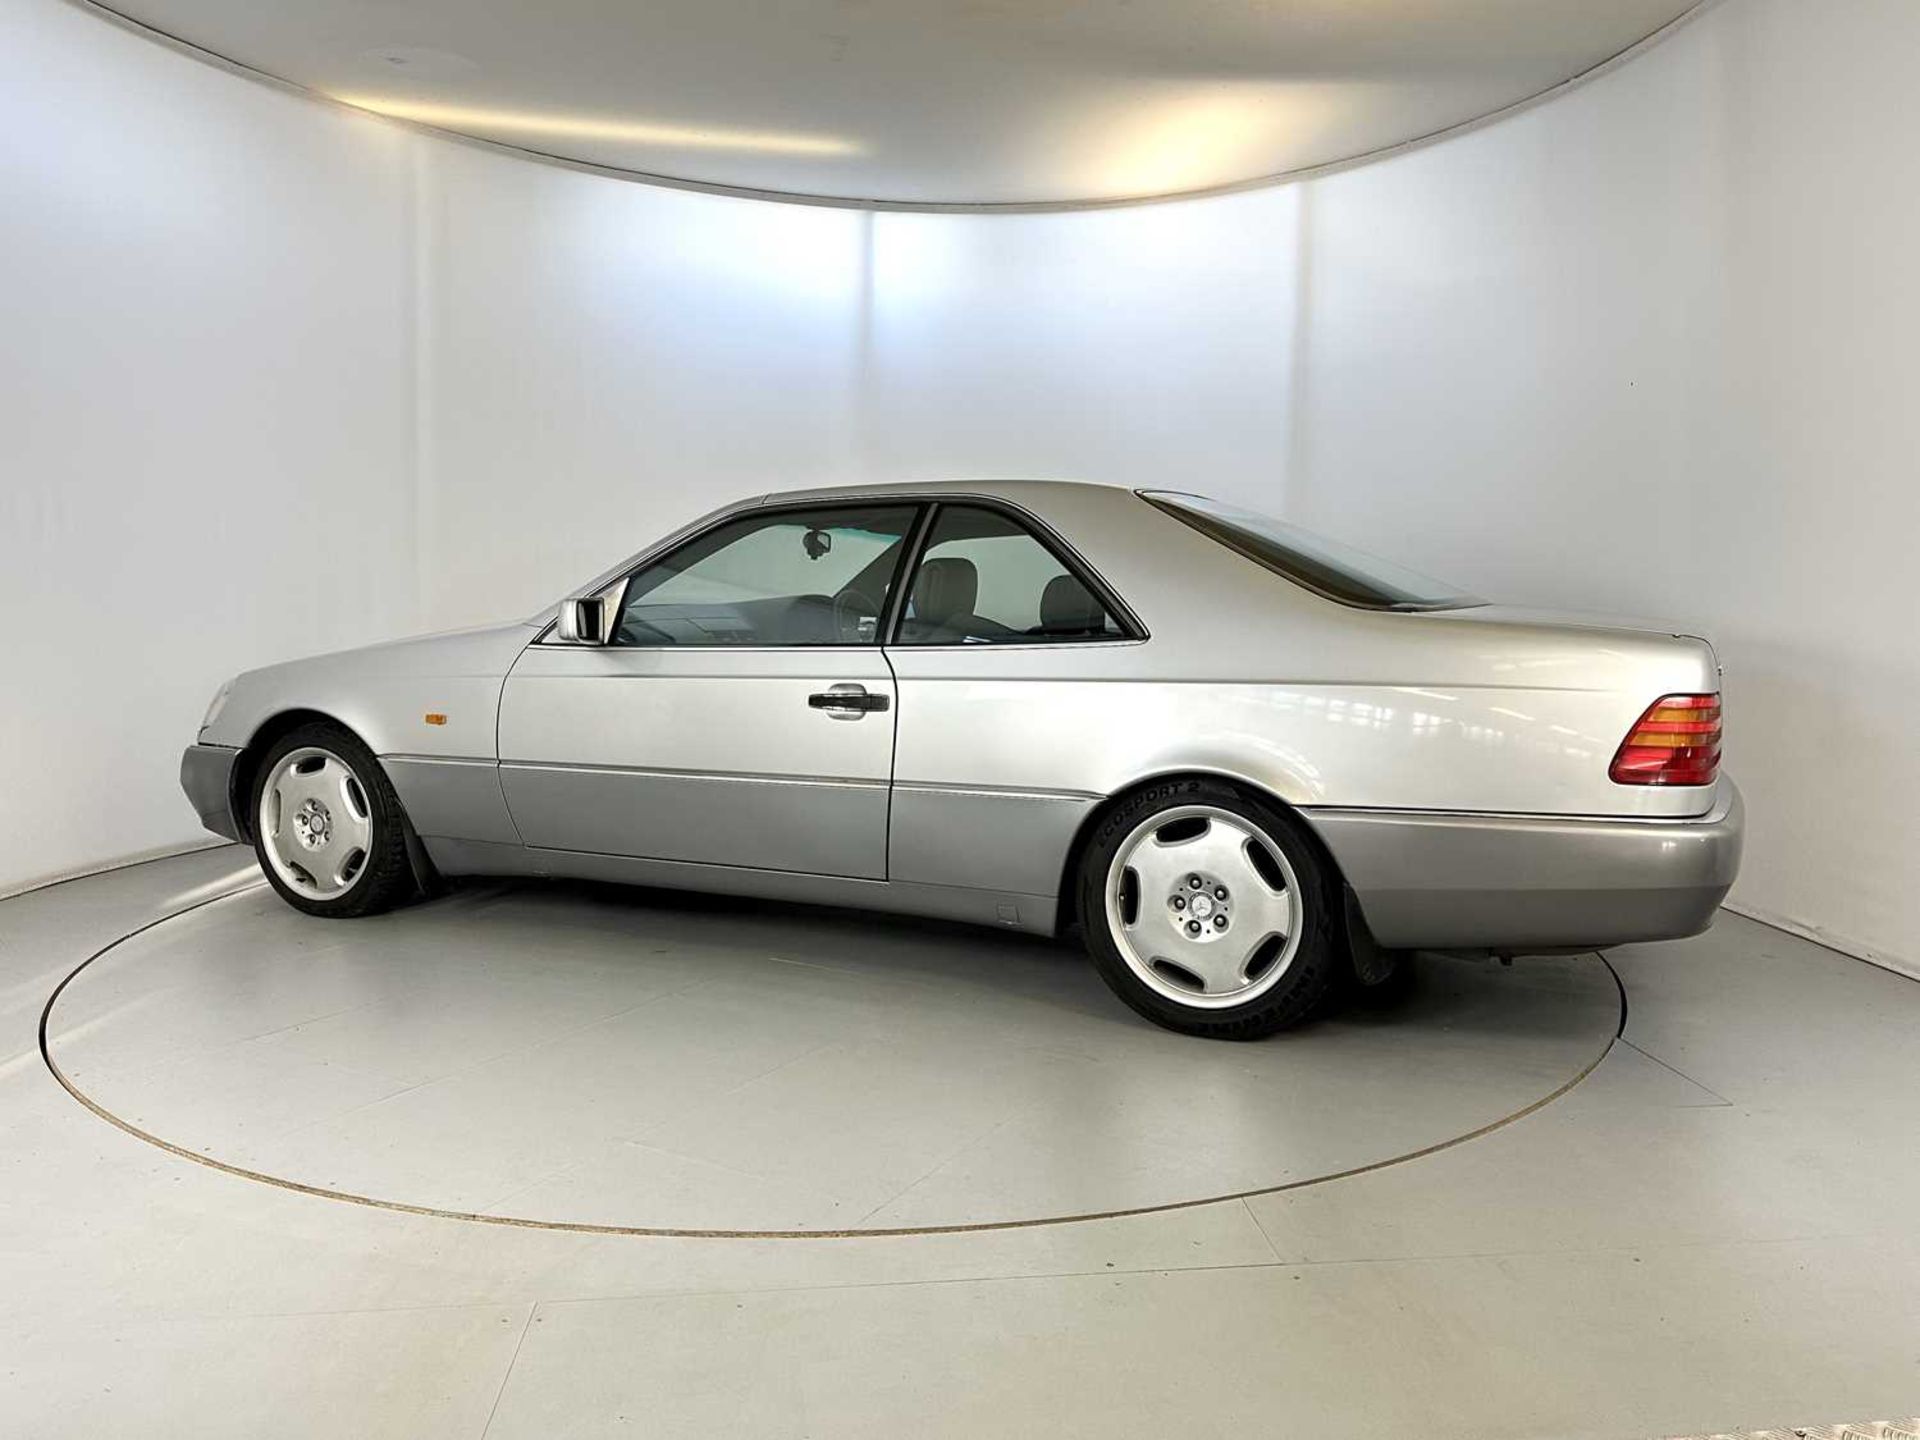 1995 Mercedes-Benz S500 Coupe - Image 6 of 30